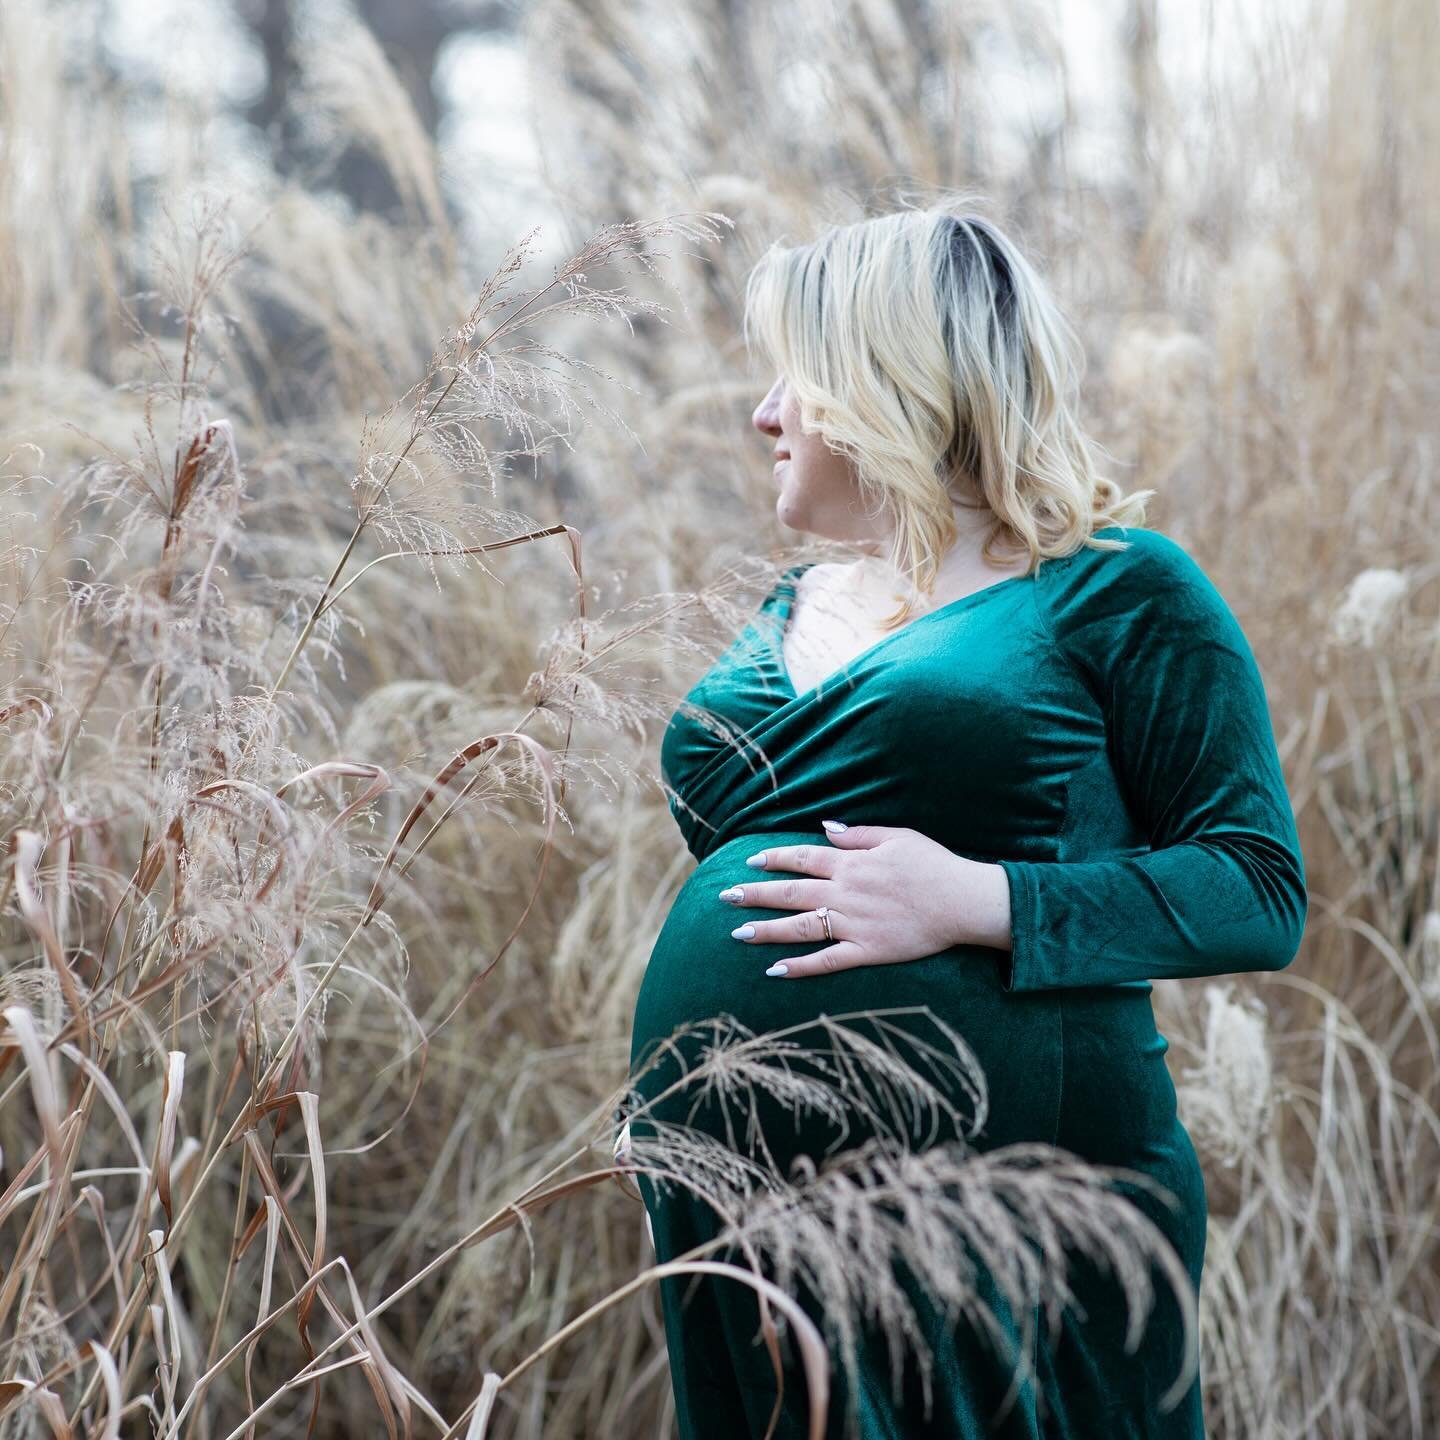 I recently had the pleasure of capturing the energy of anticipation for this mama-to-be. Such a goddess. And an emerald green velvet gown? Yes, please. A dream come true for my eyeballs. It&rsquo;s truly such a gift to have the opportunity to capture